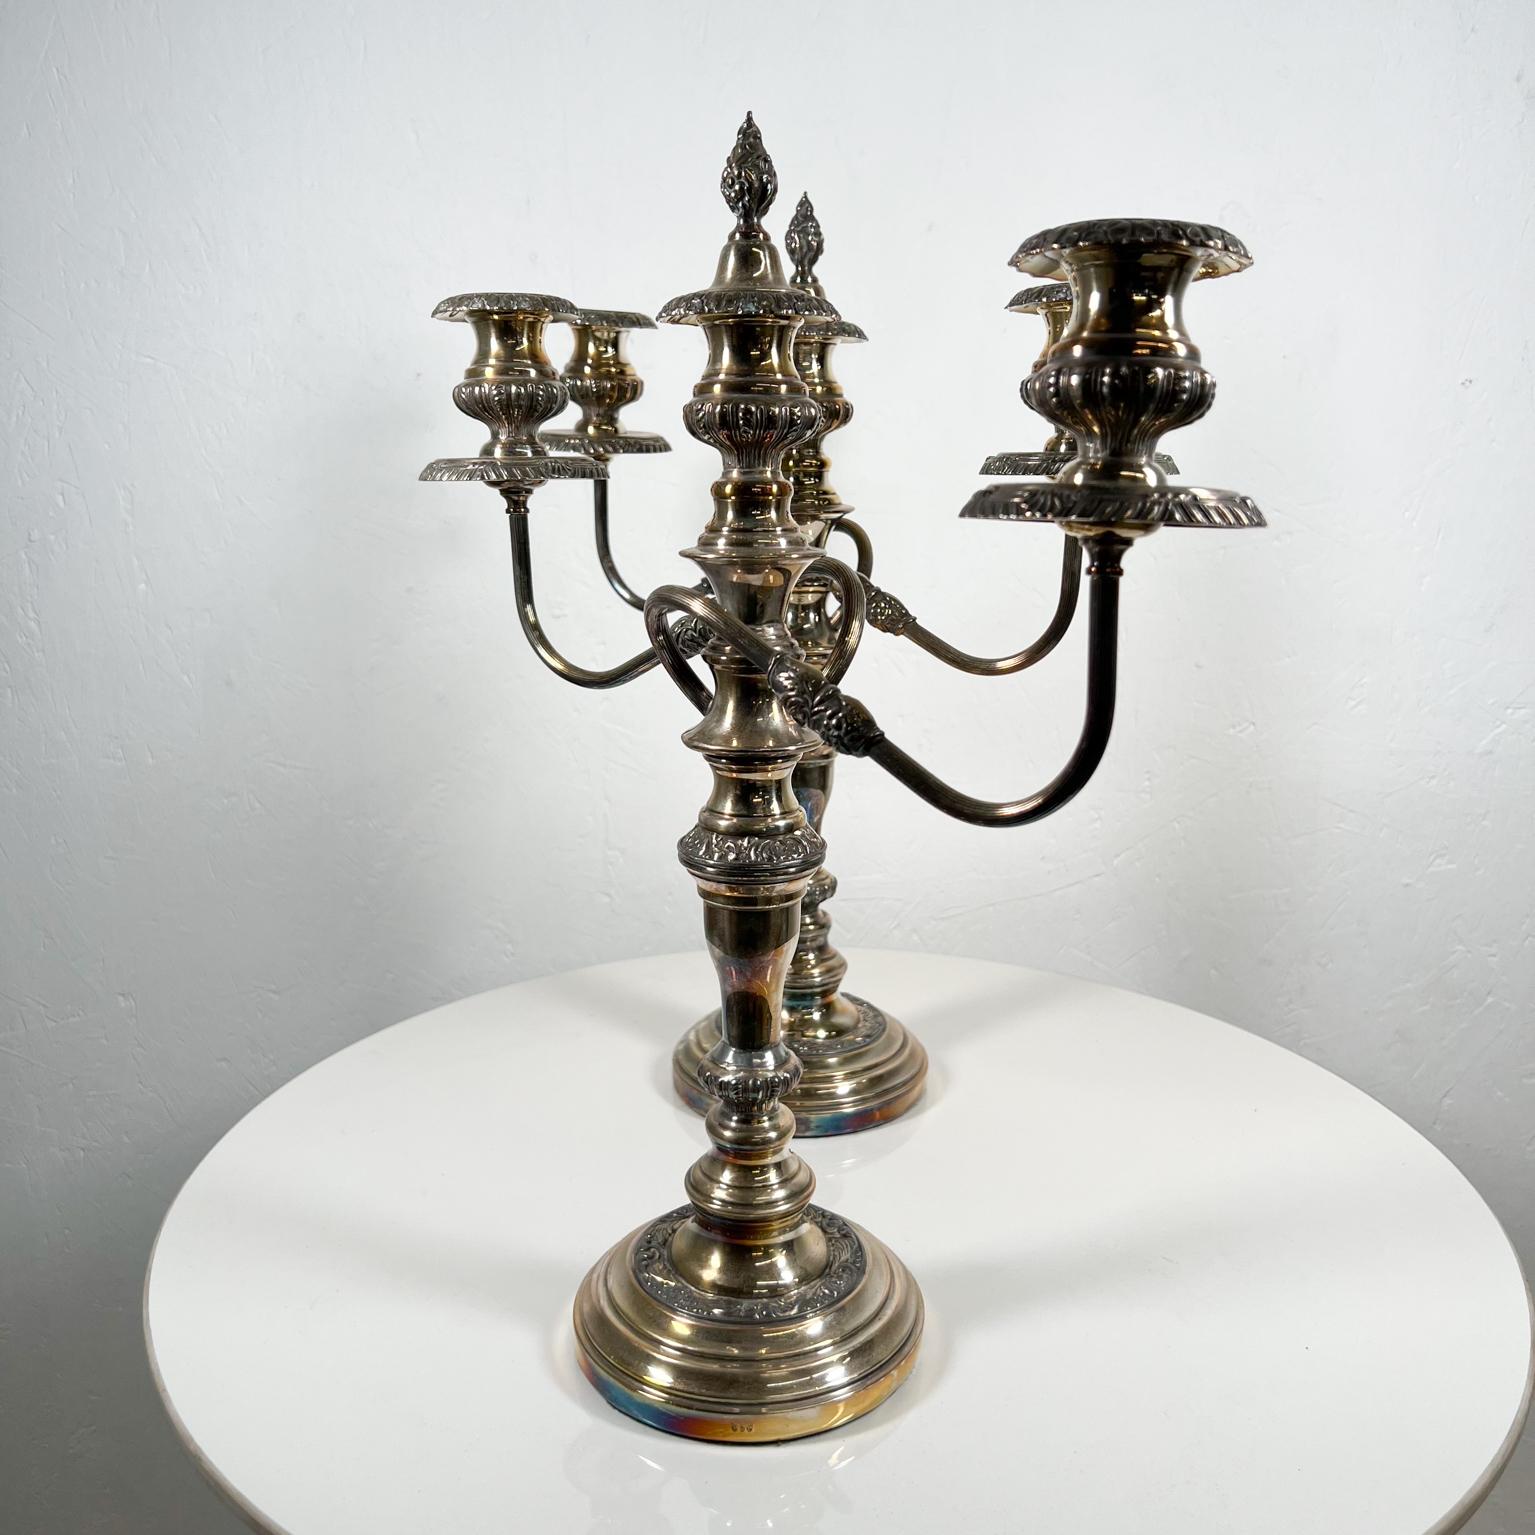 1940s Pair of Silverplate Candelabras by Goldfeder Silver Company New York 3